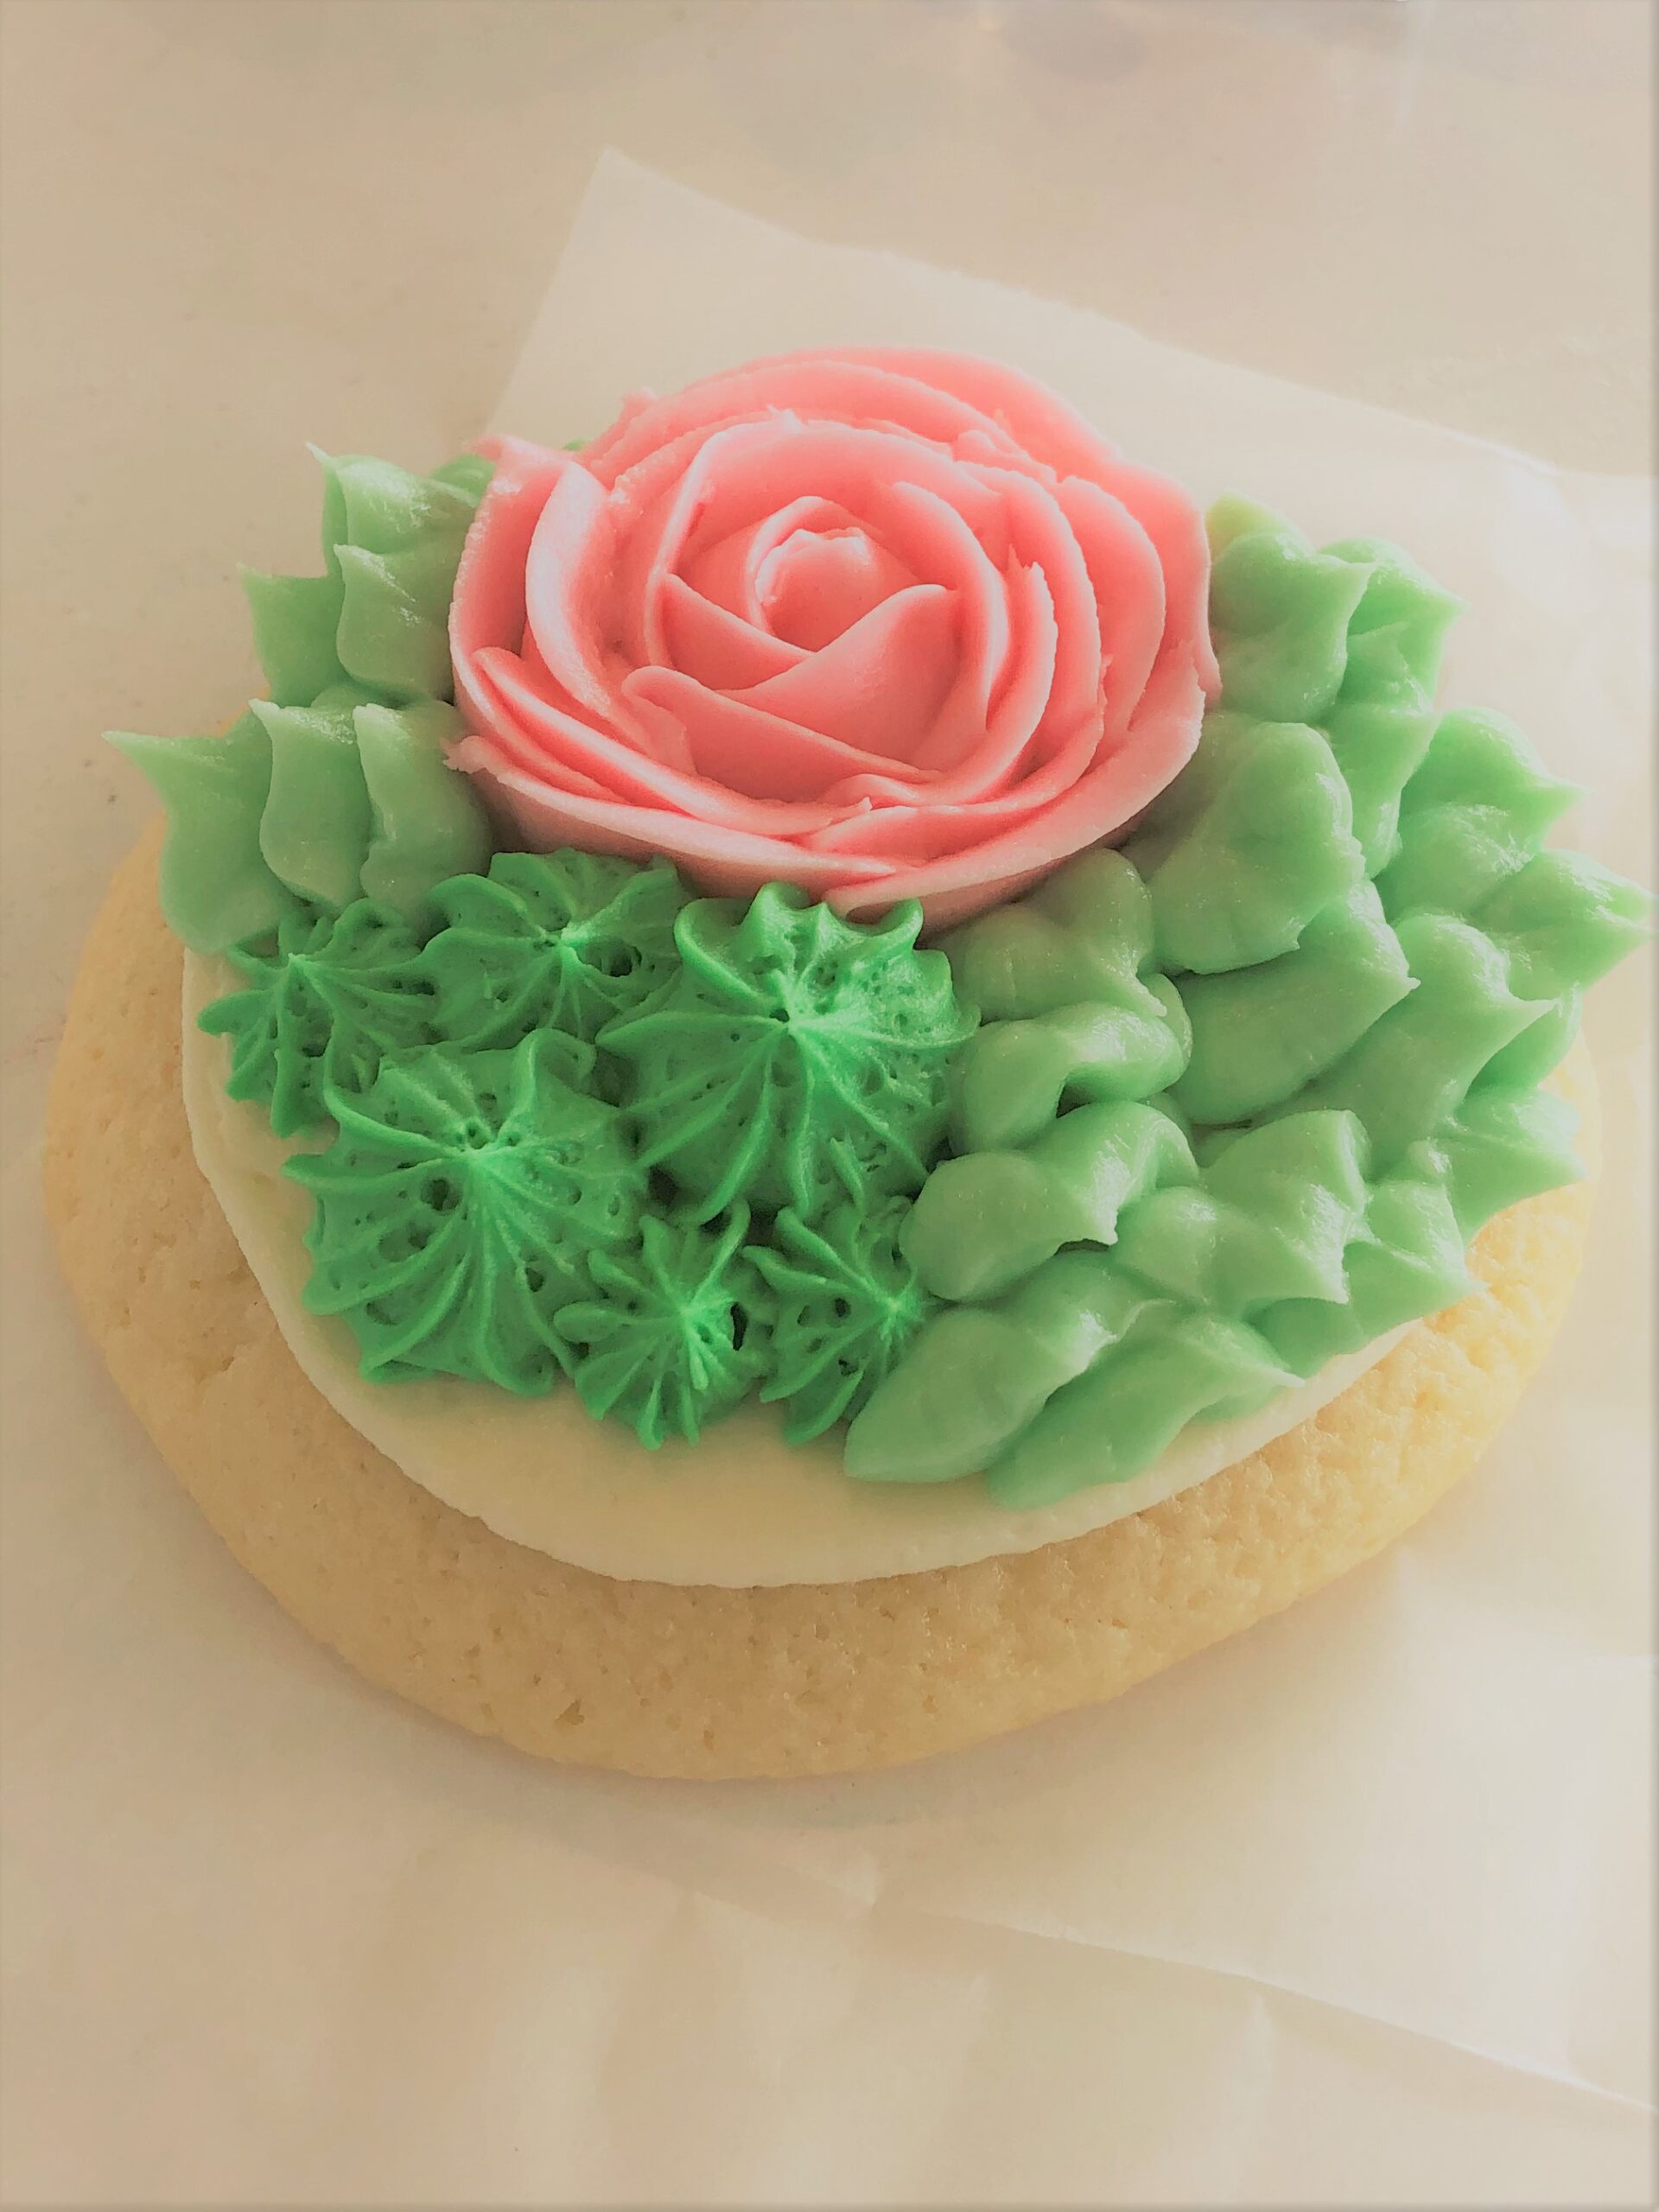 sugar cookie with succulent shaped frosting on top